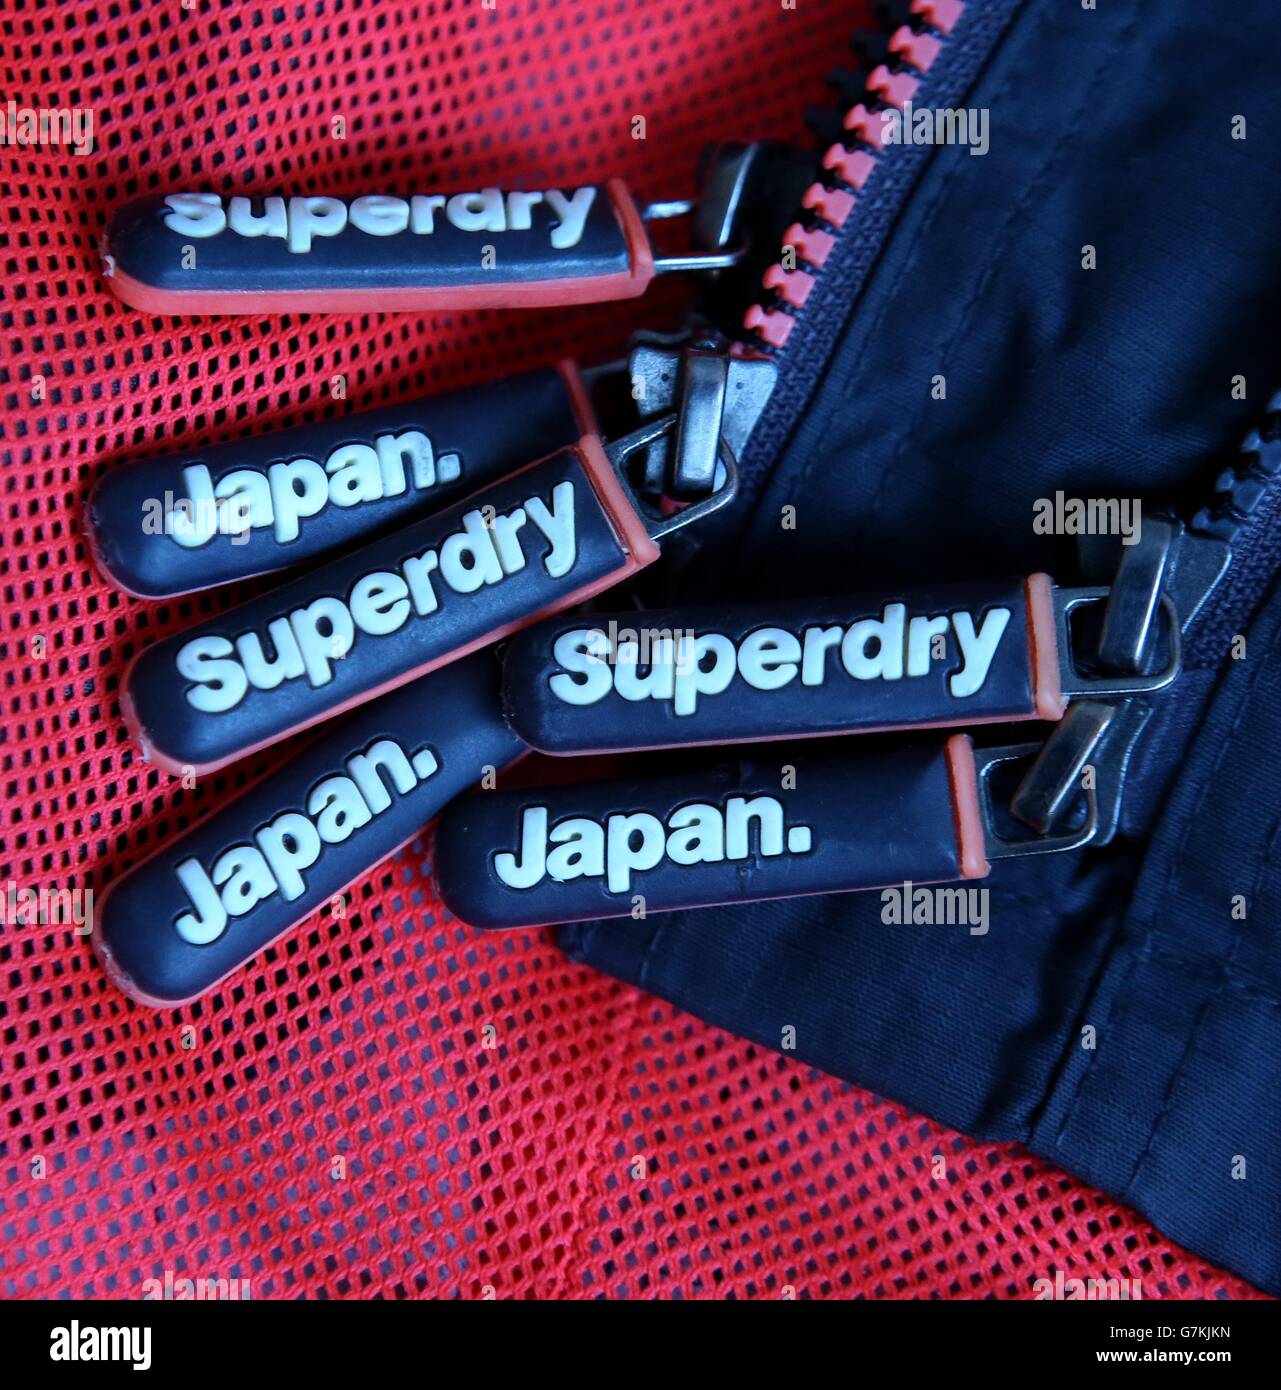 https://c8.alamy.com/comp/G7KJKN/a-close-up-of-superdry-branded-clothing-as-the-owner-of-the-superdry-G7KJKN.jpg